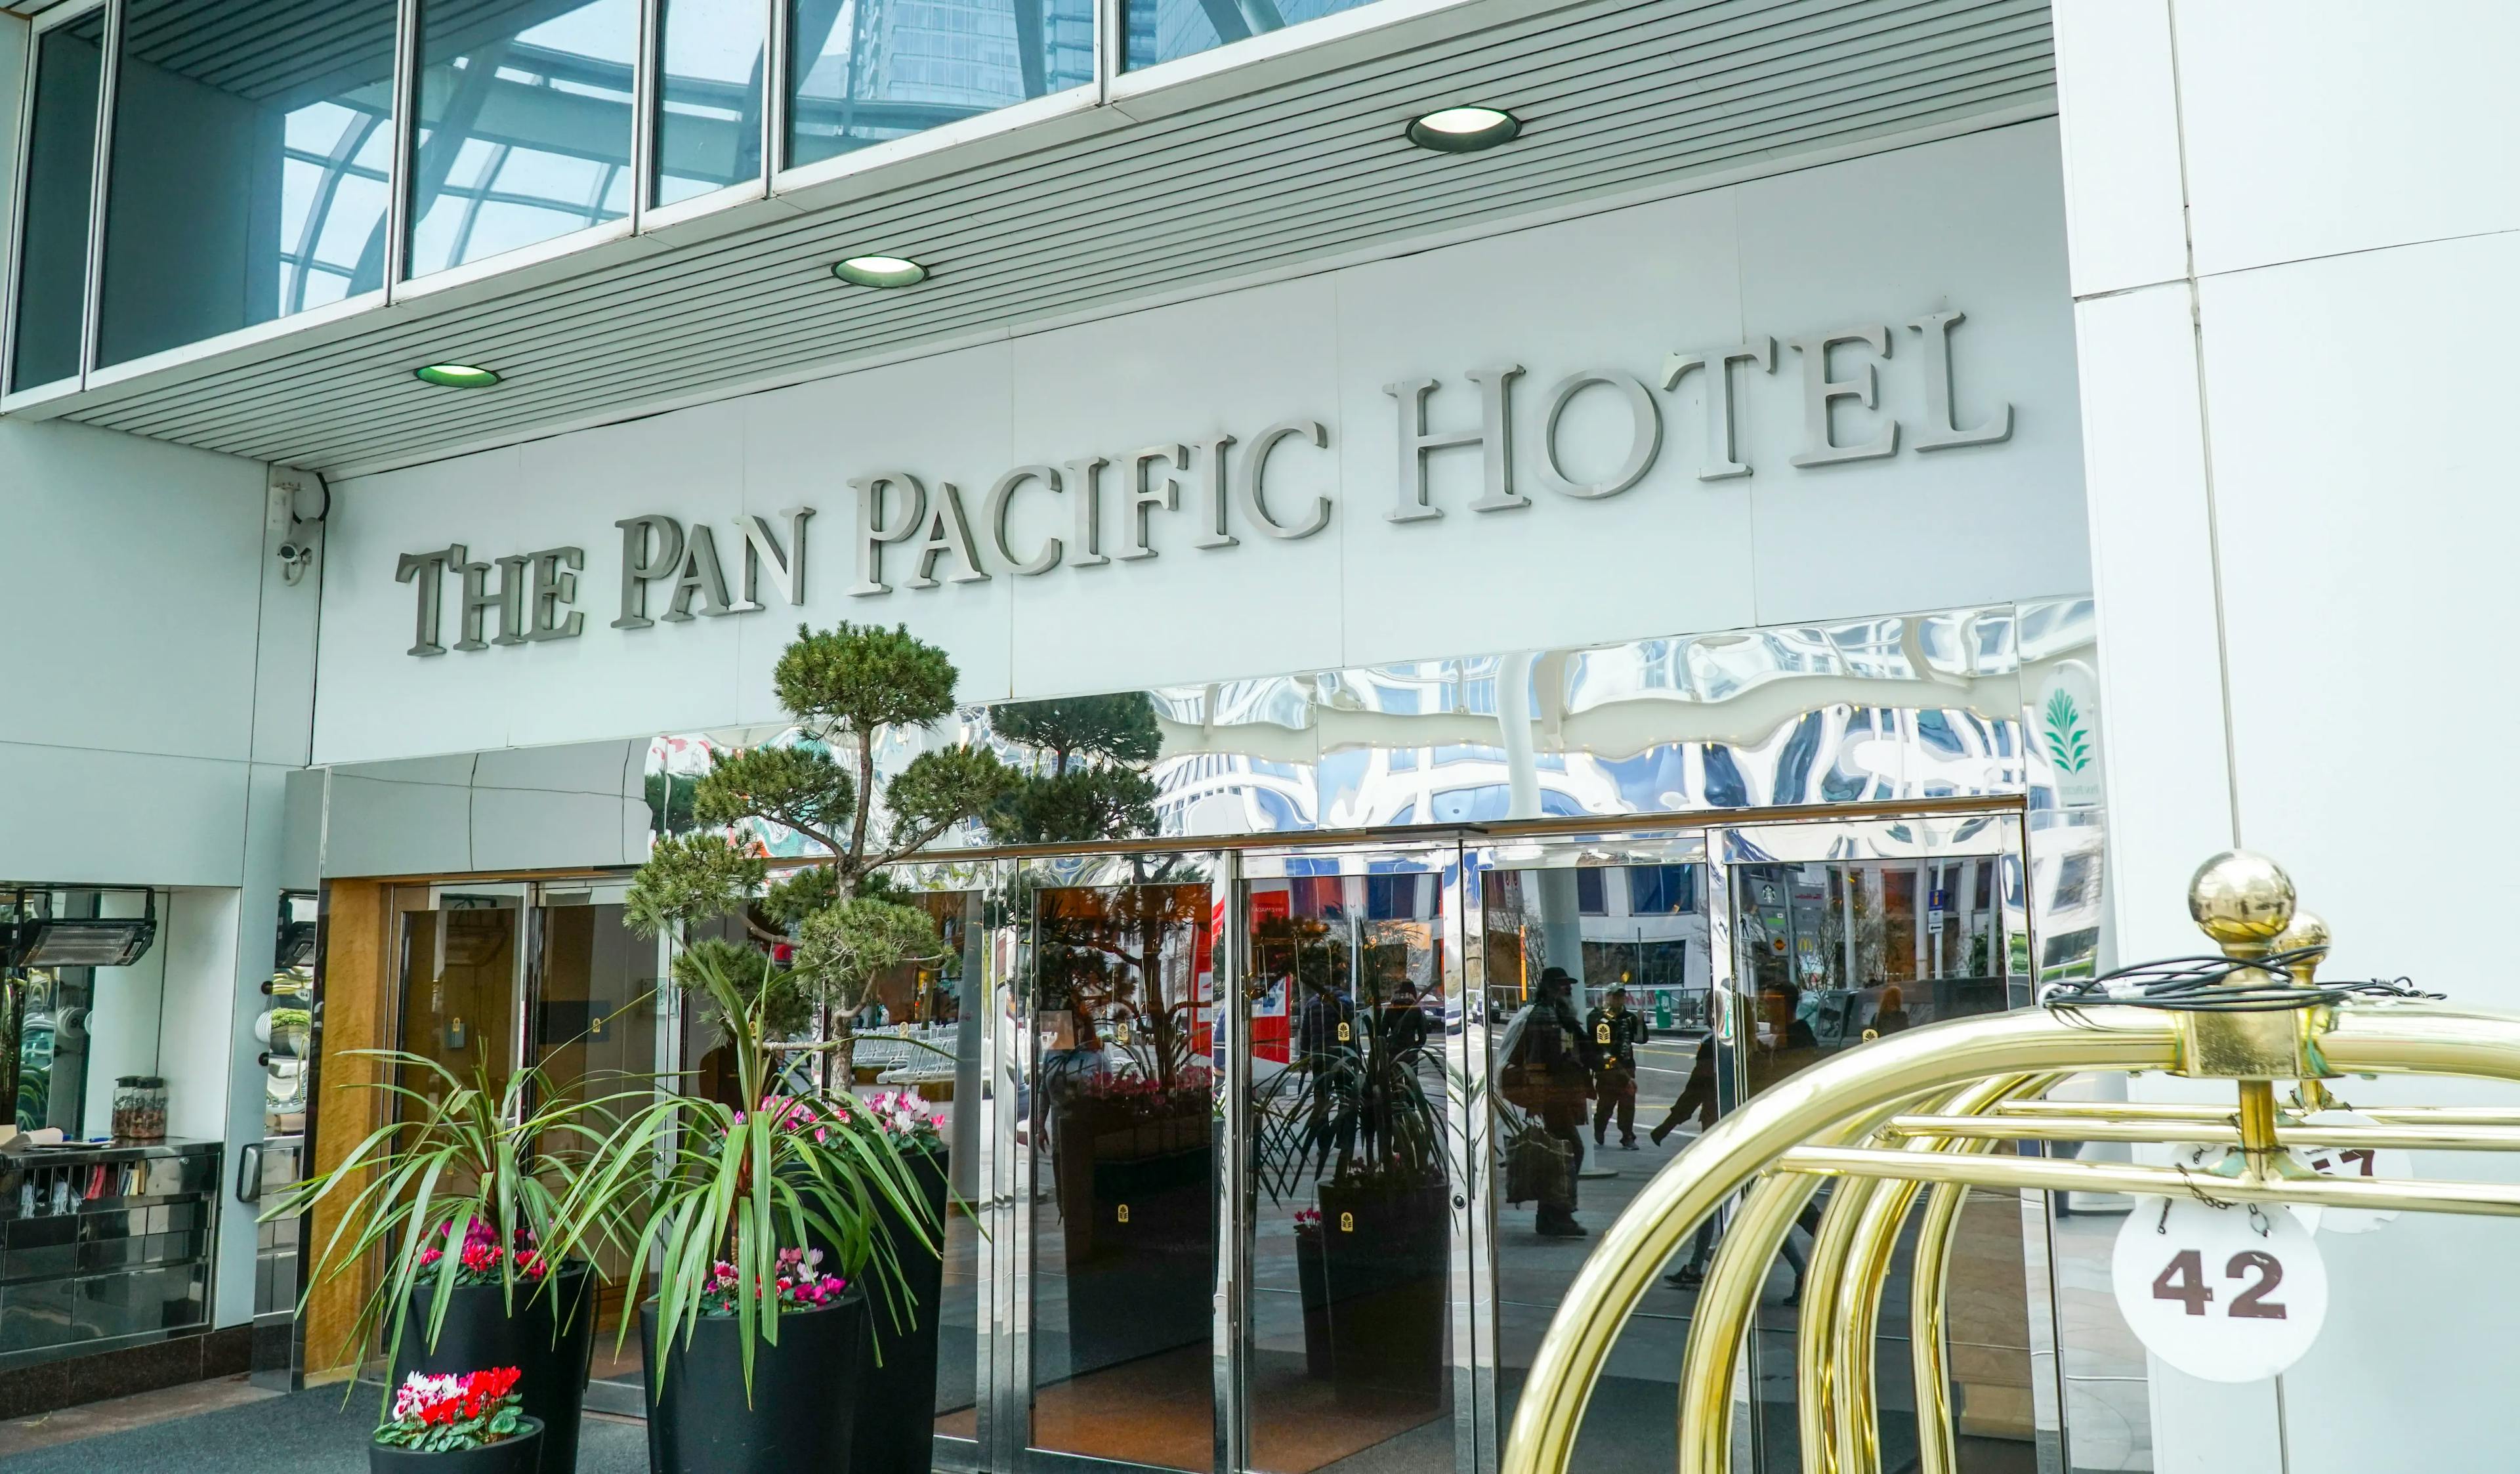 Pan Pacific chooses JustPerform for OPEX planning